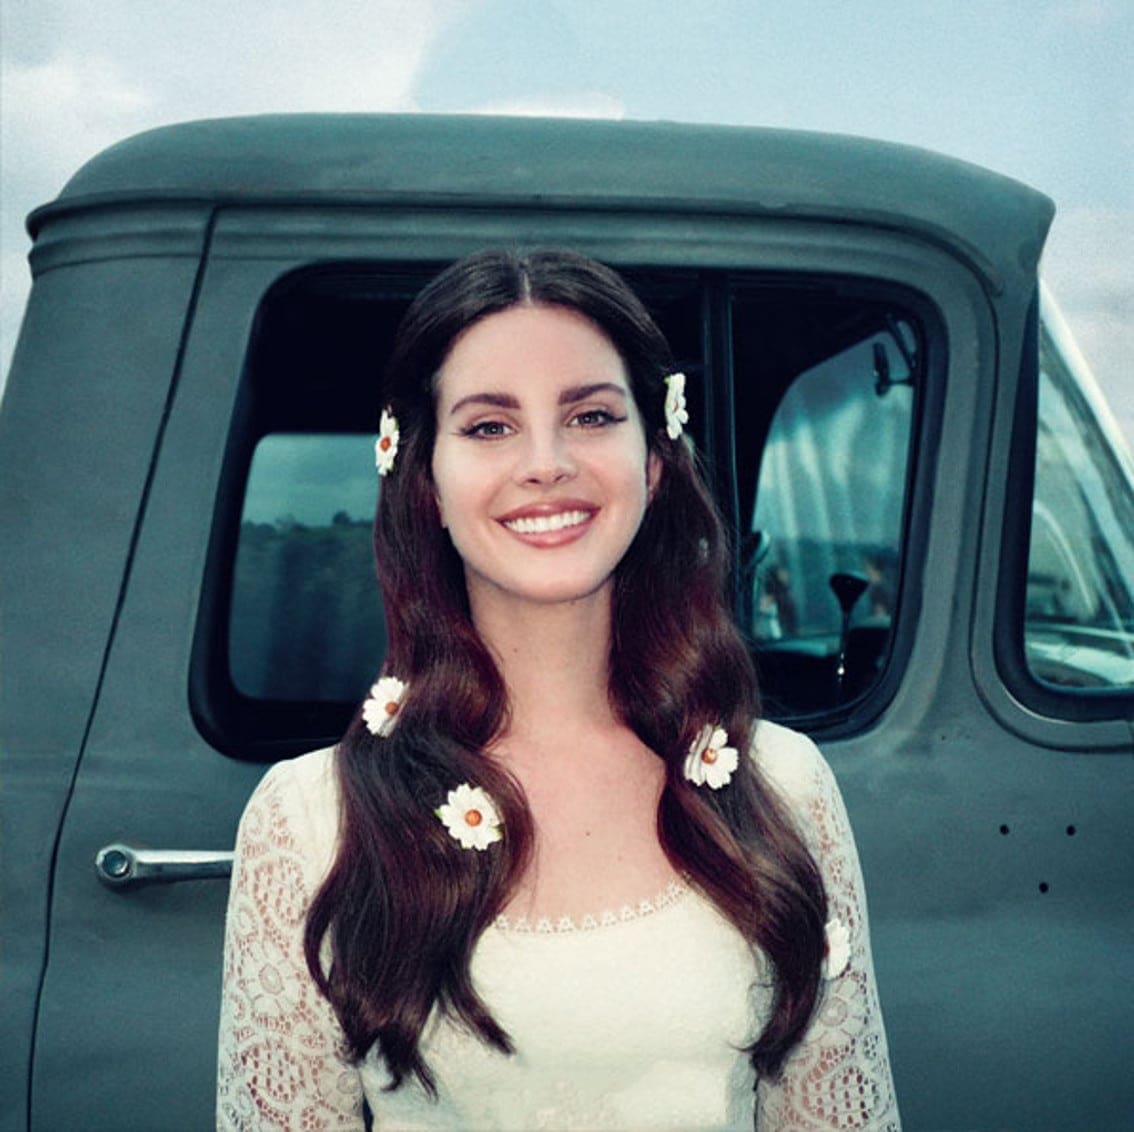 Lana Del Rey defends decision to play Israel show